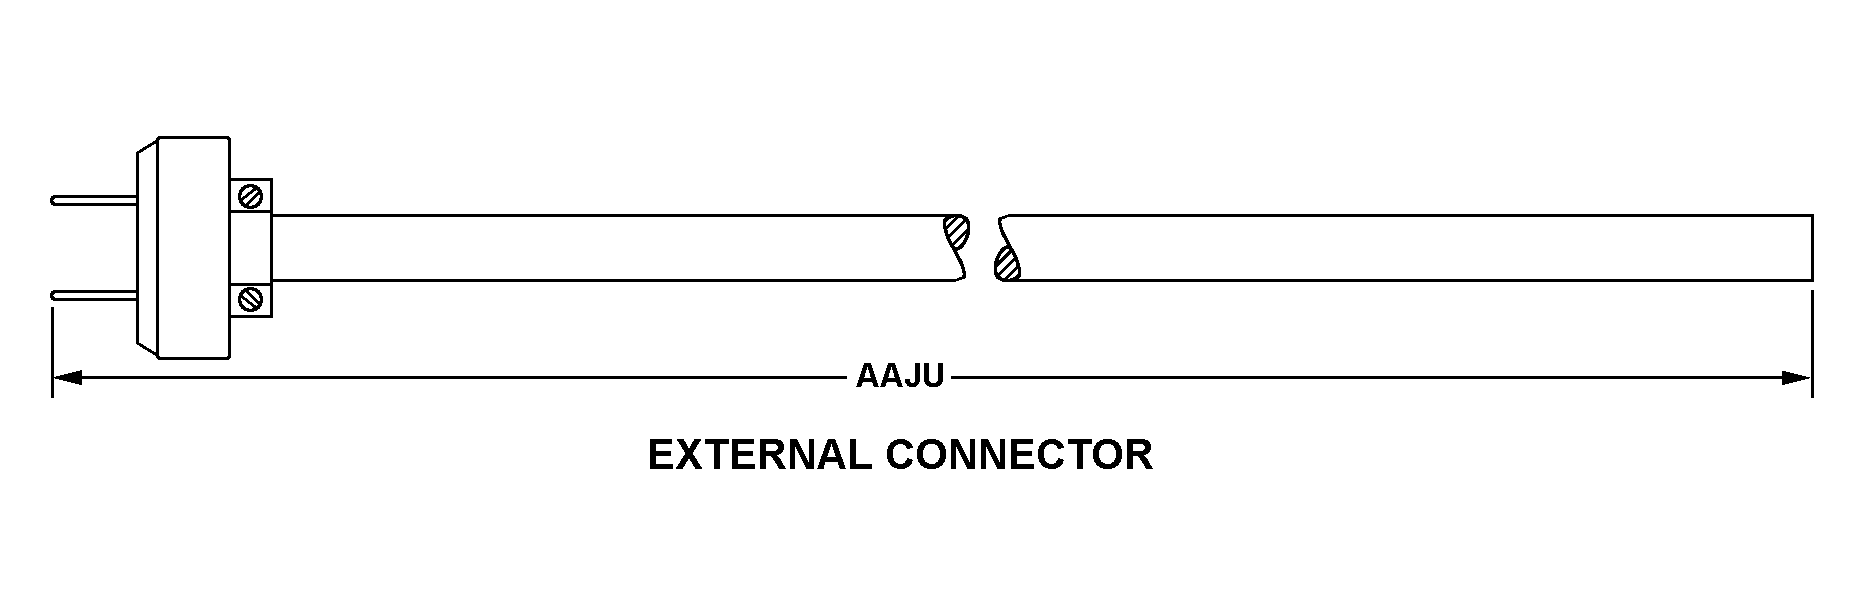 EXTERNAL CONNECTOR style nsn 6150-01-541-2535